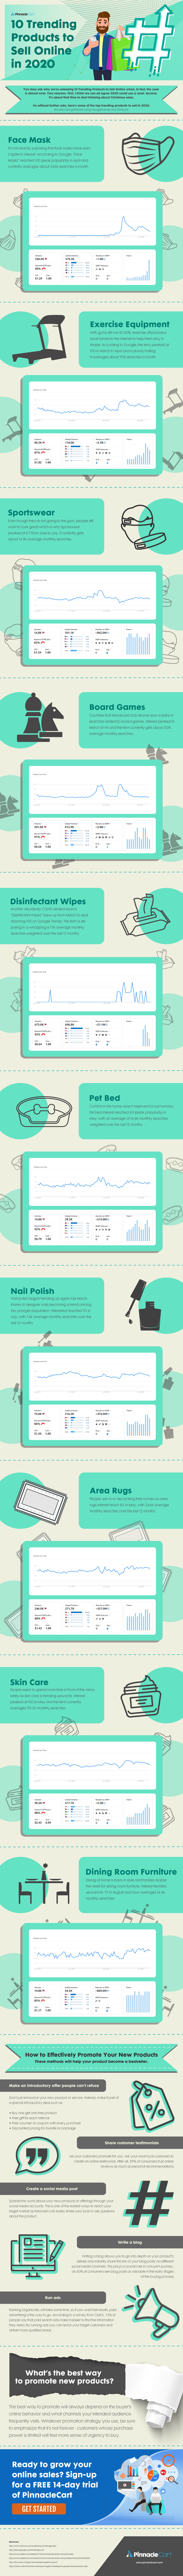 10 Trending Products to Sell Online in 2020 (Infographic)